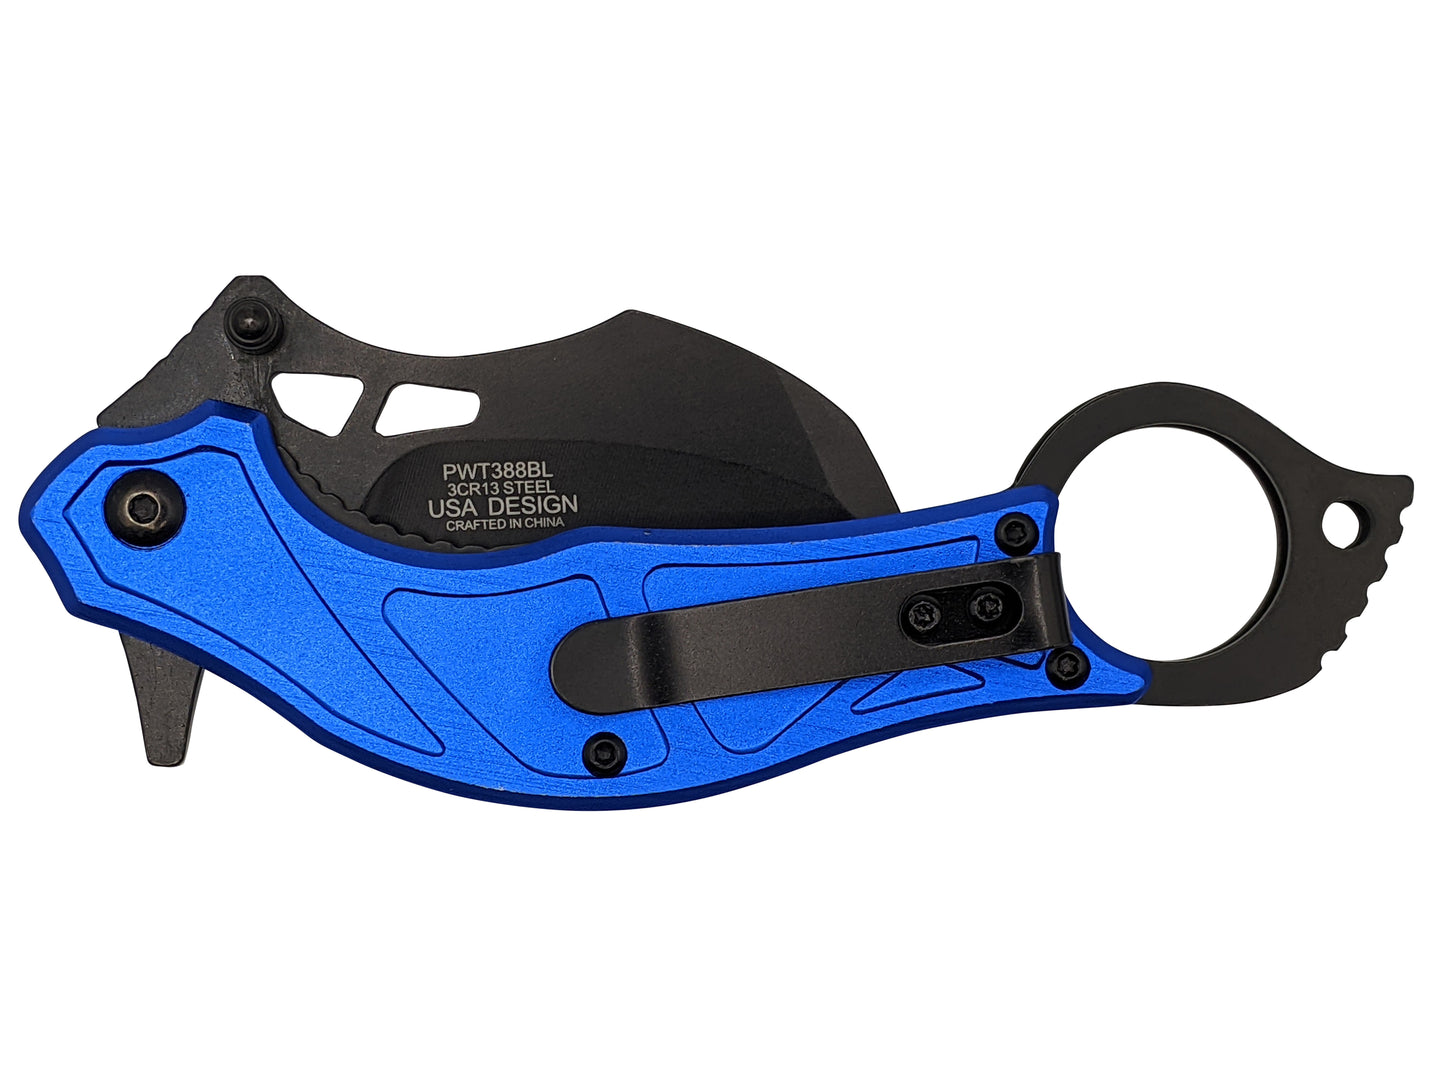 Spring-Assist Folding Knife Wartech Tactical Karambit 3in. Claw Blade Blue/Black